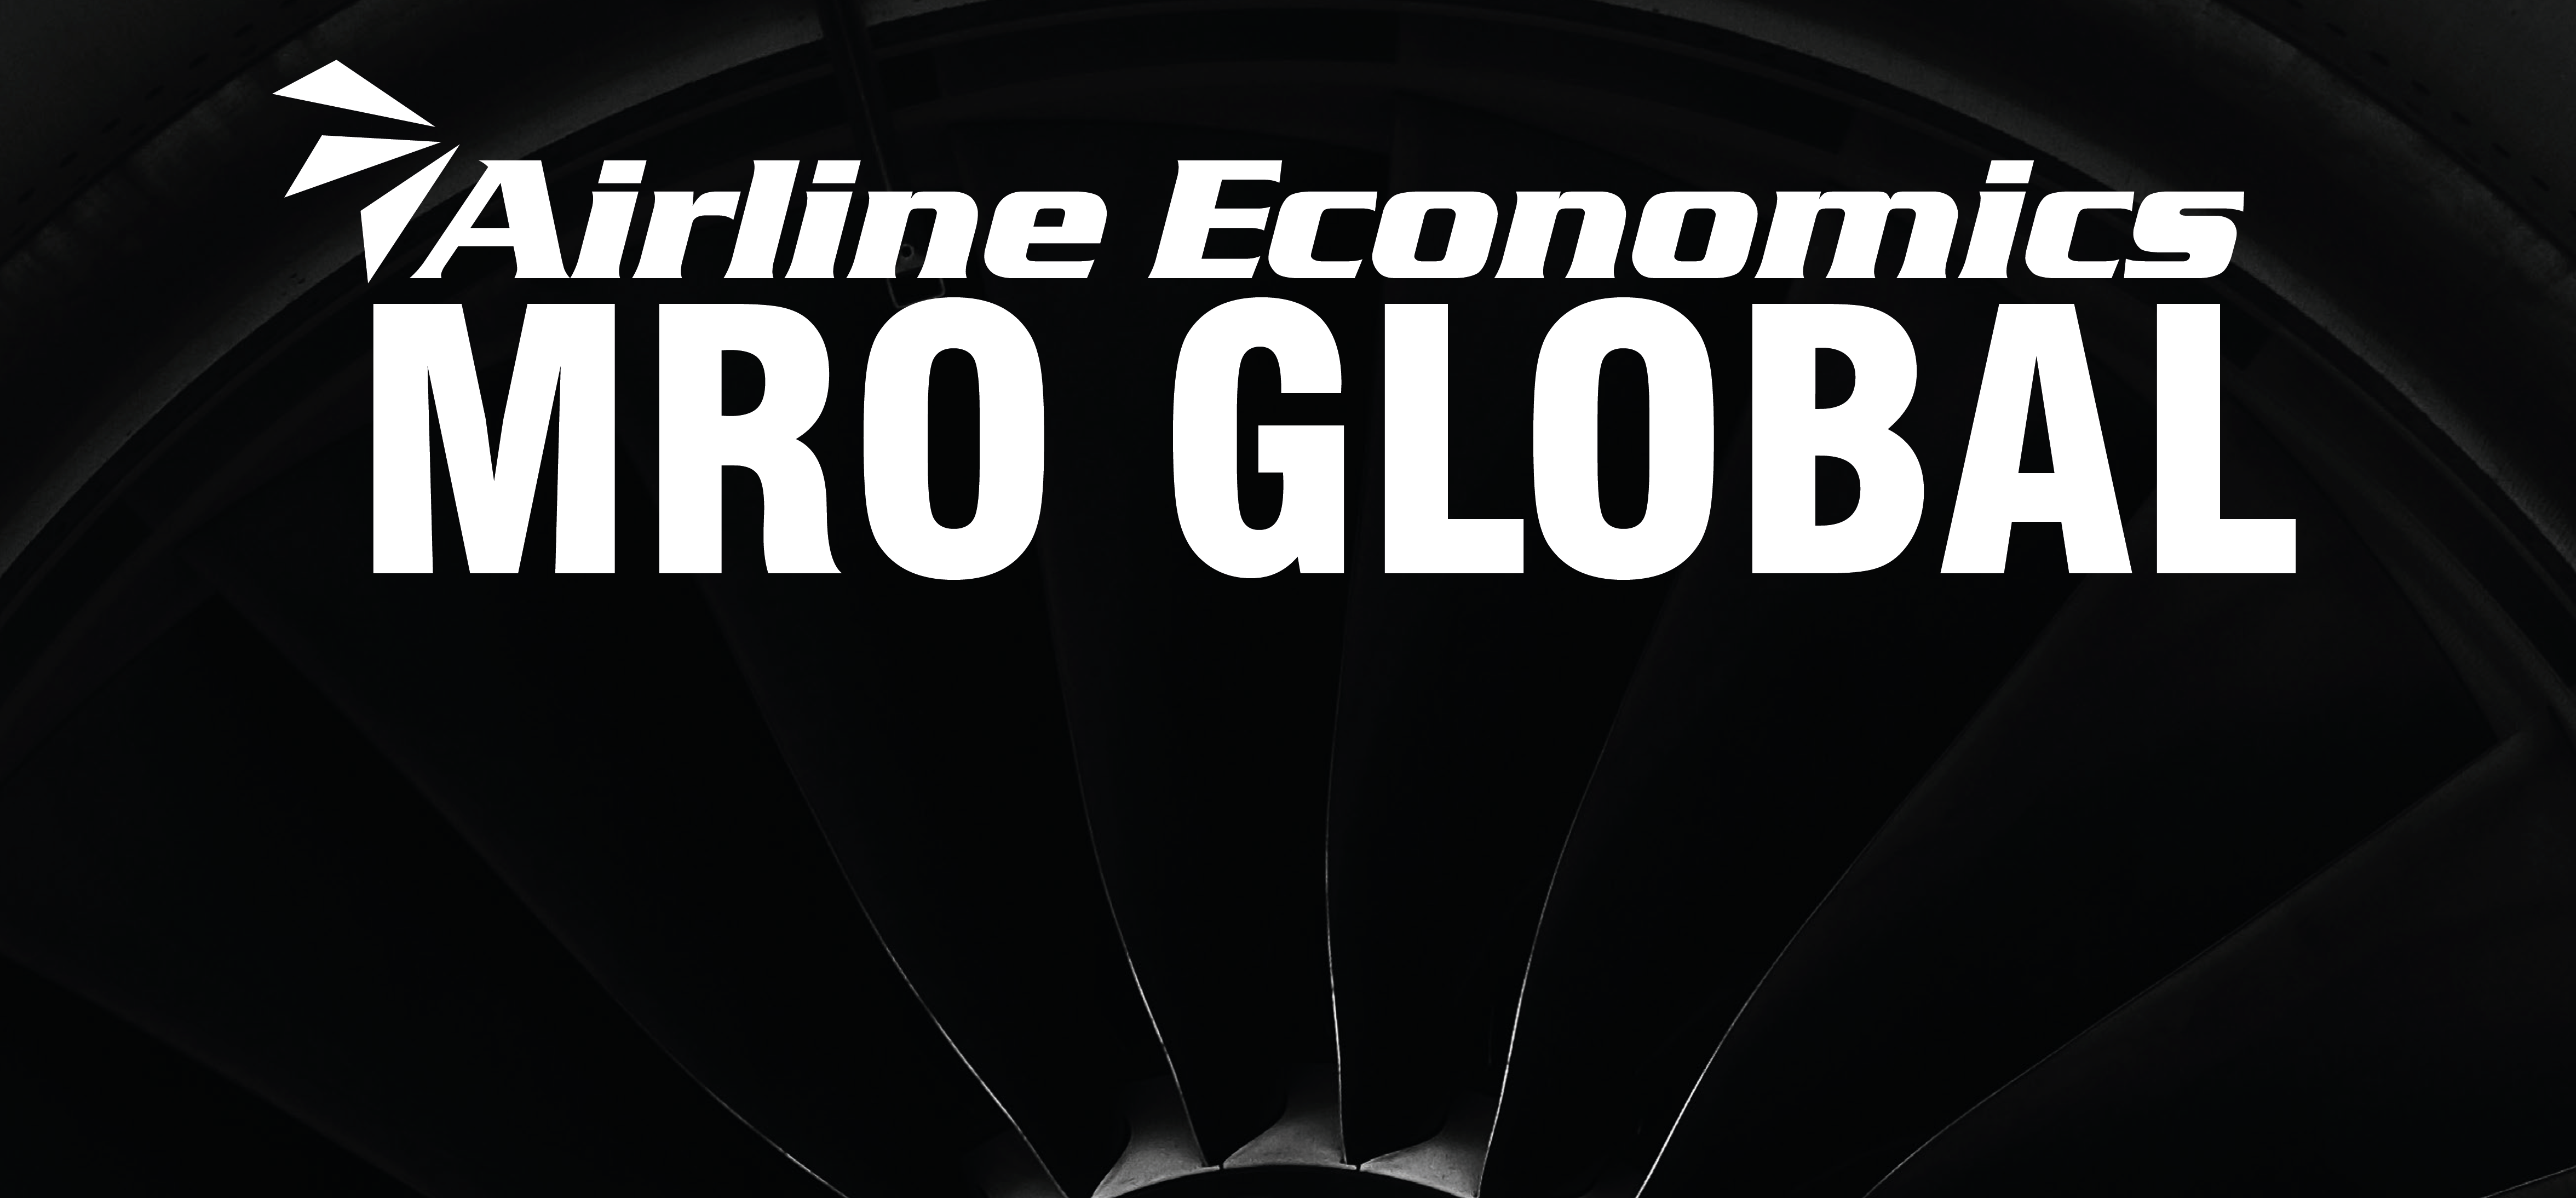 MRO Global magazine is now available